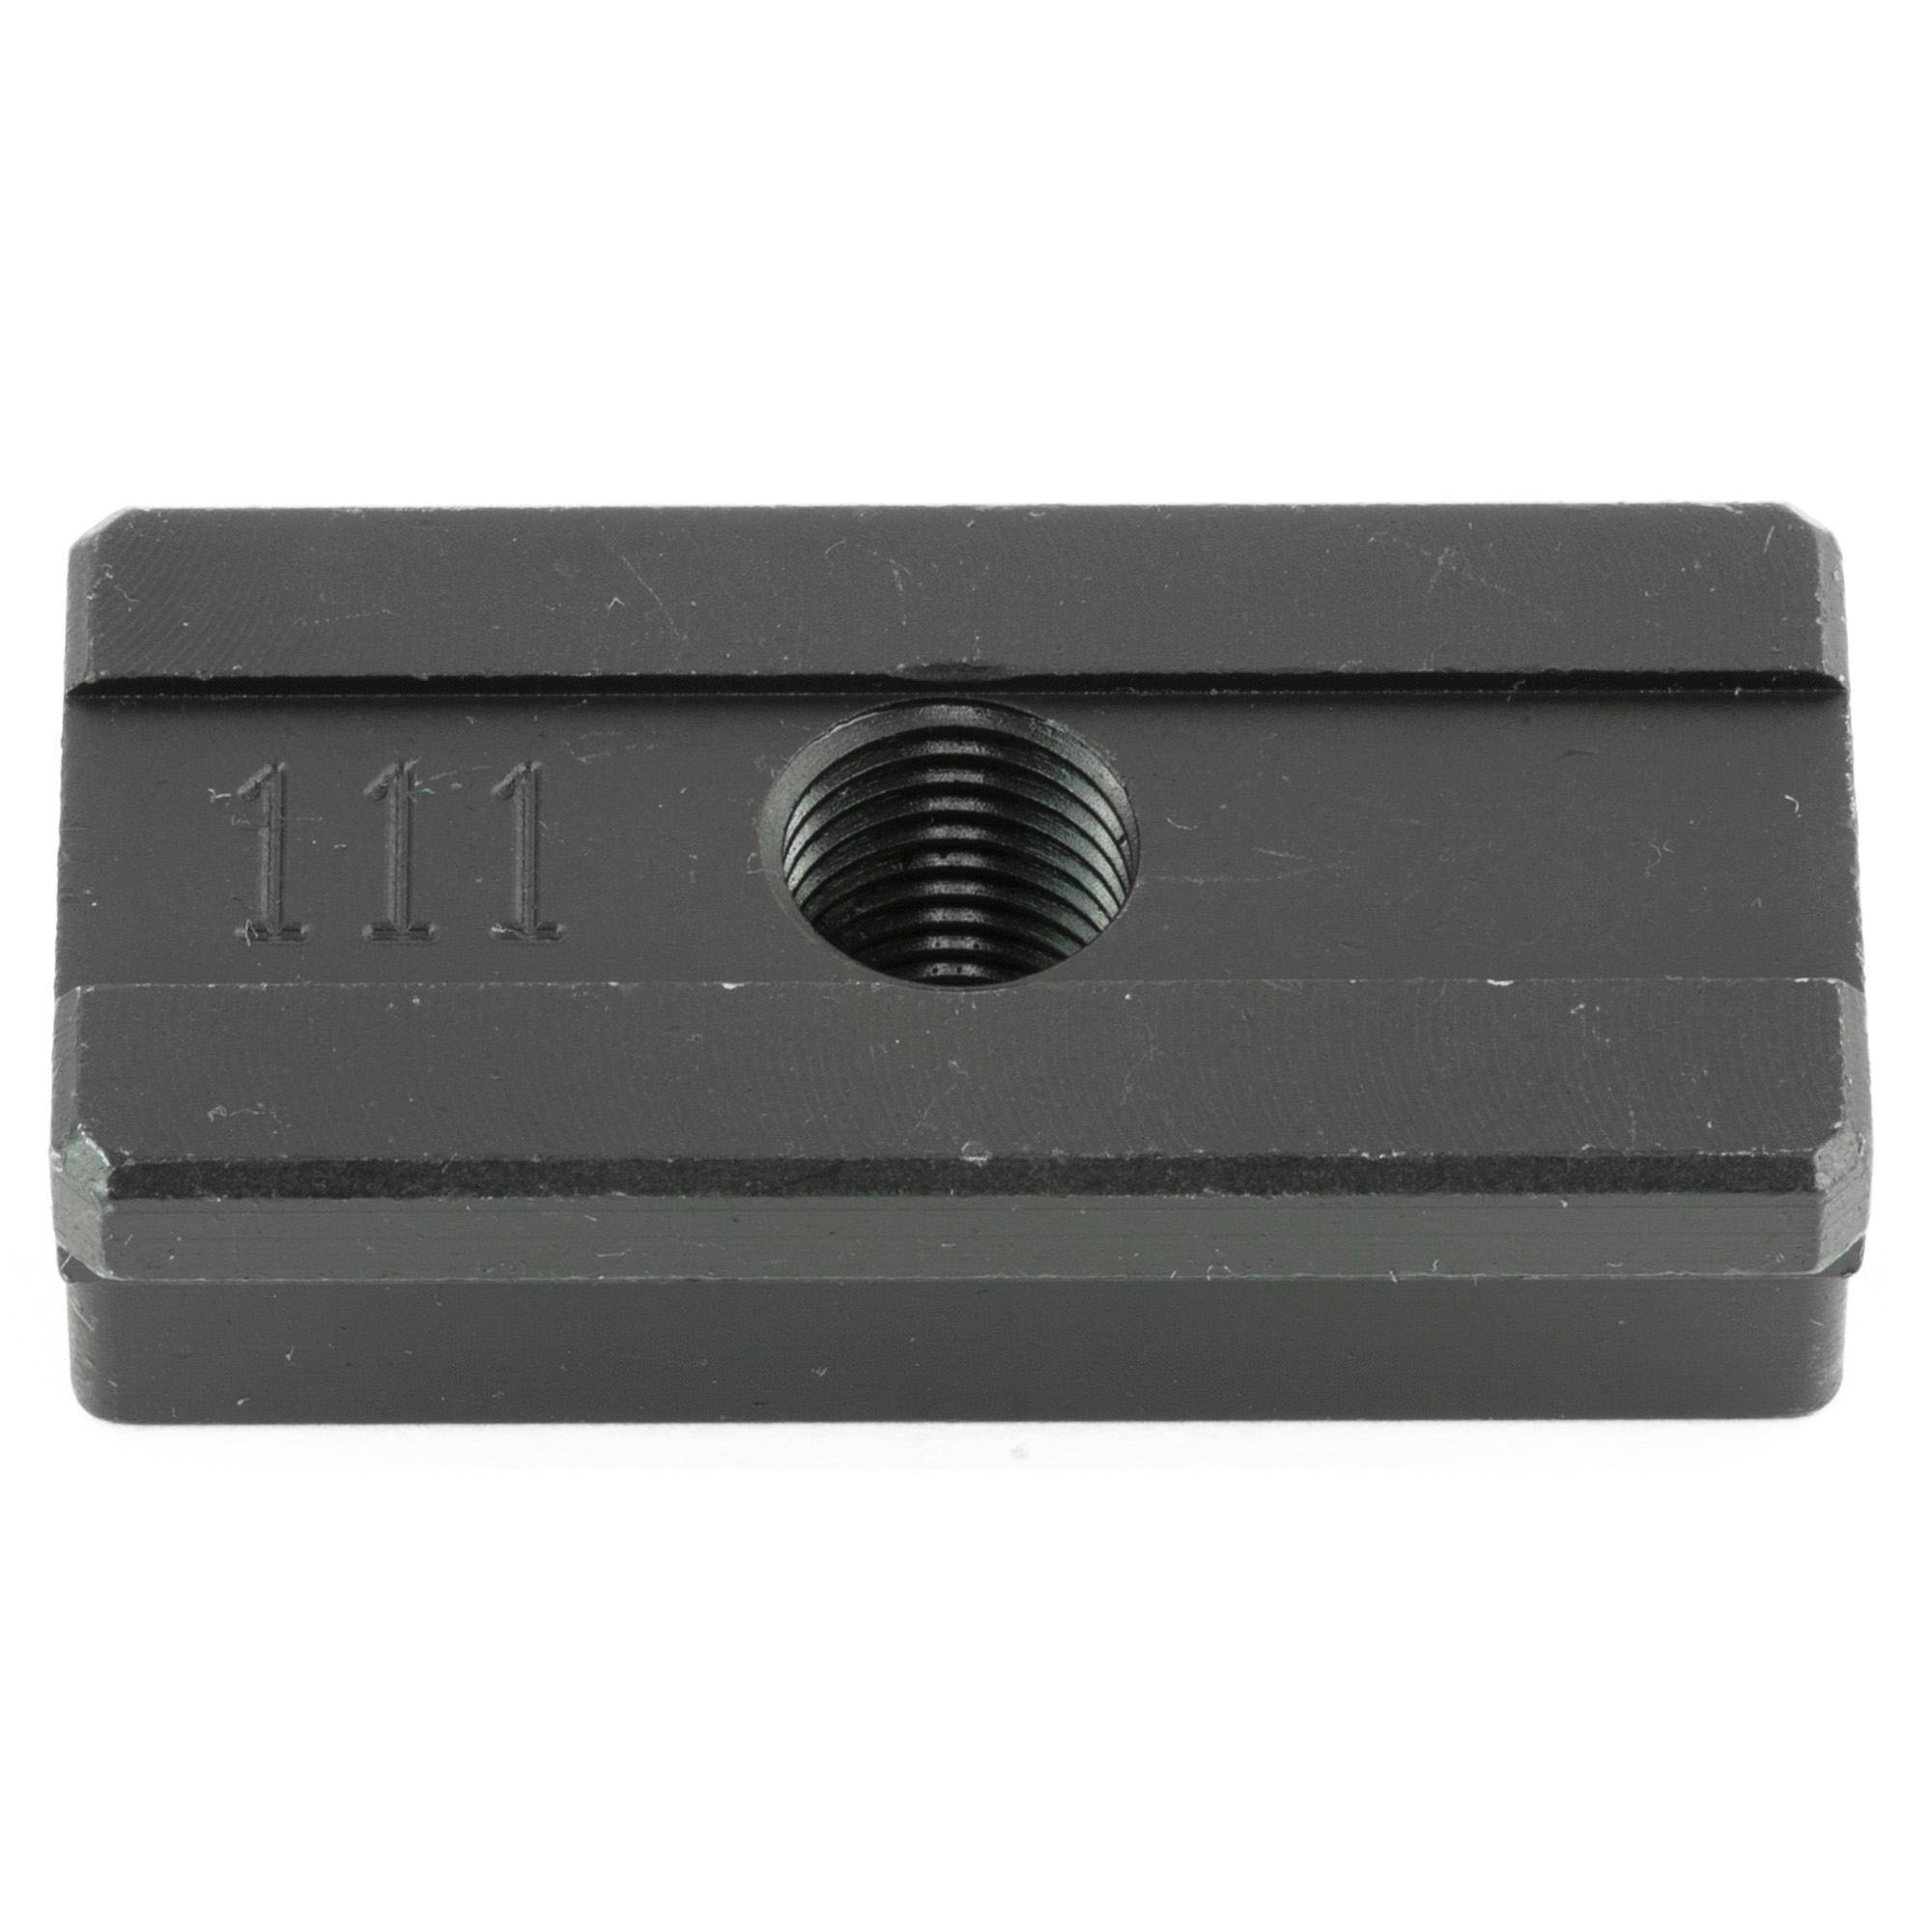 Gun Cleaning MGW SHOE PLATE FOR BERETTA 92 image 1